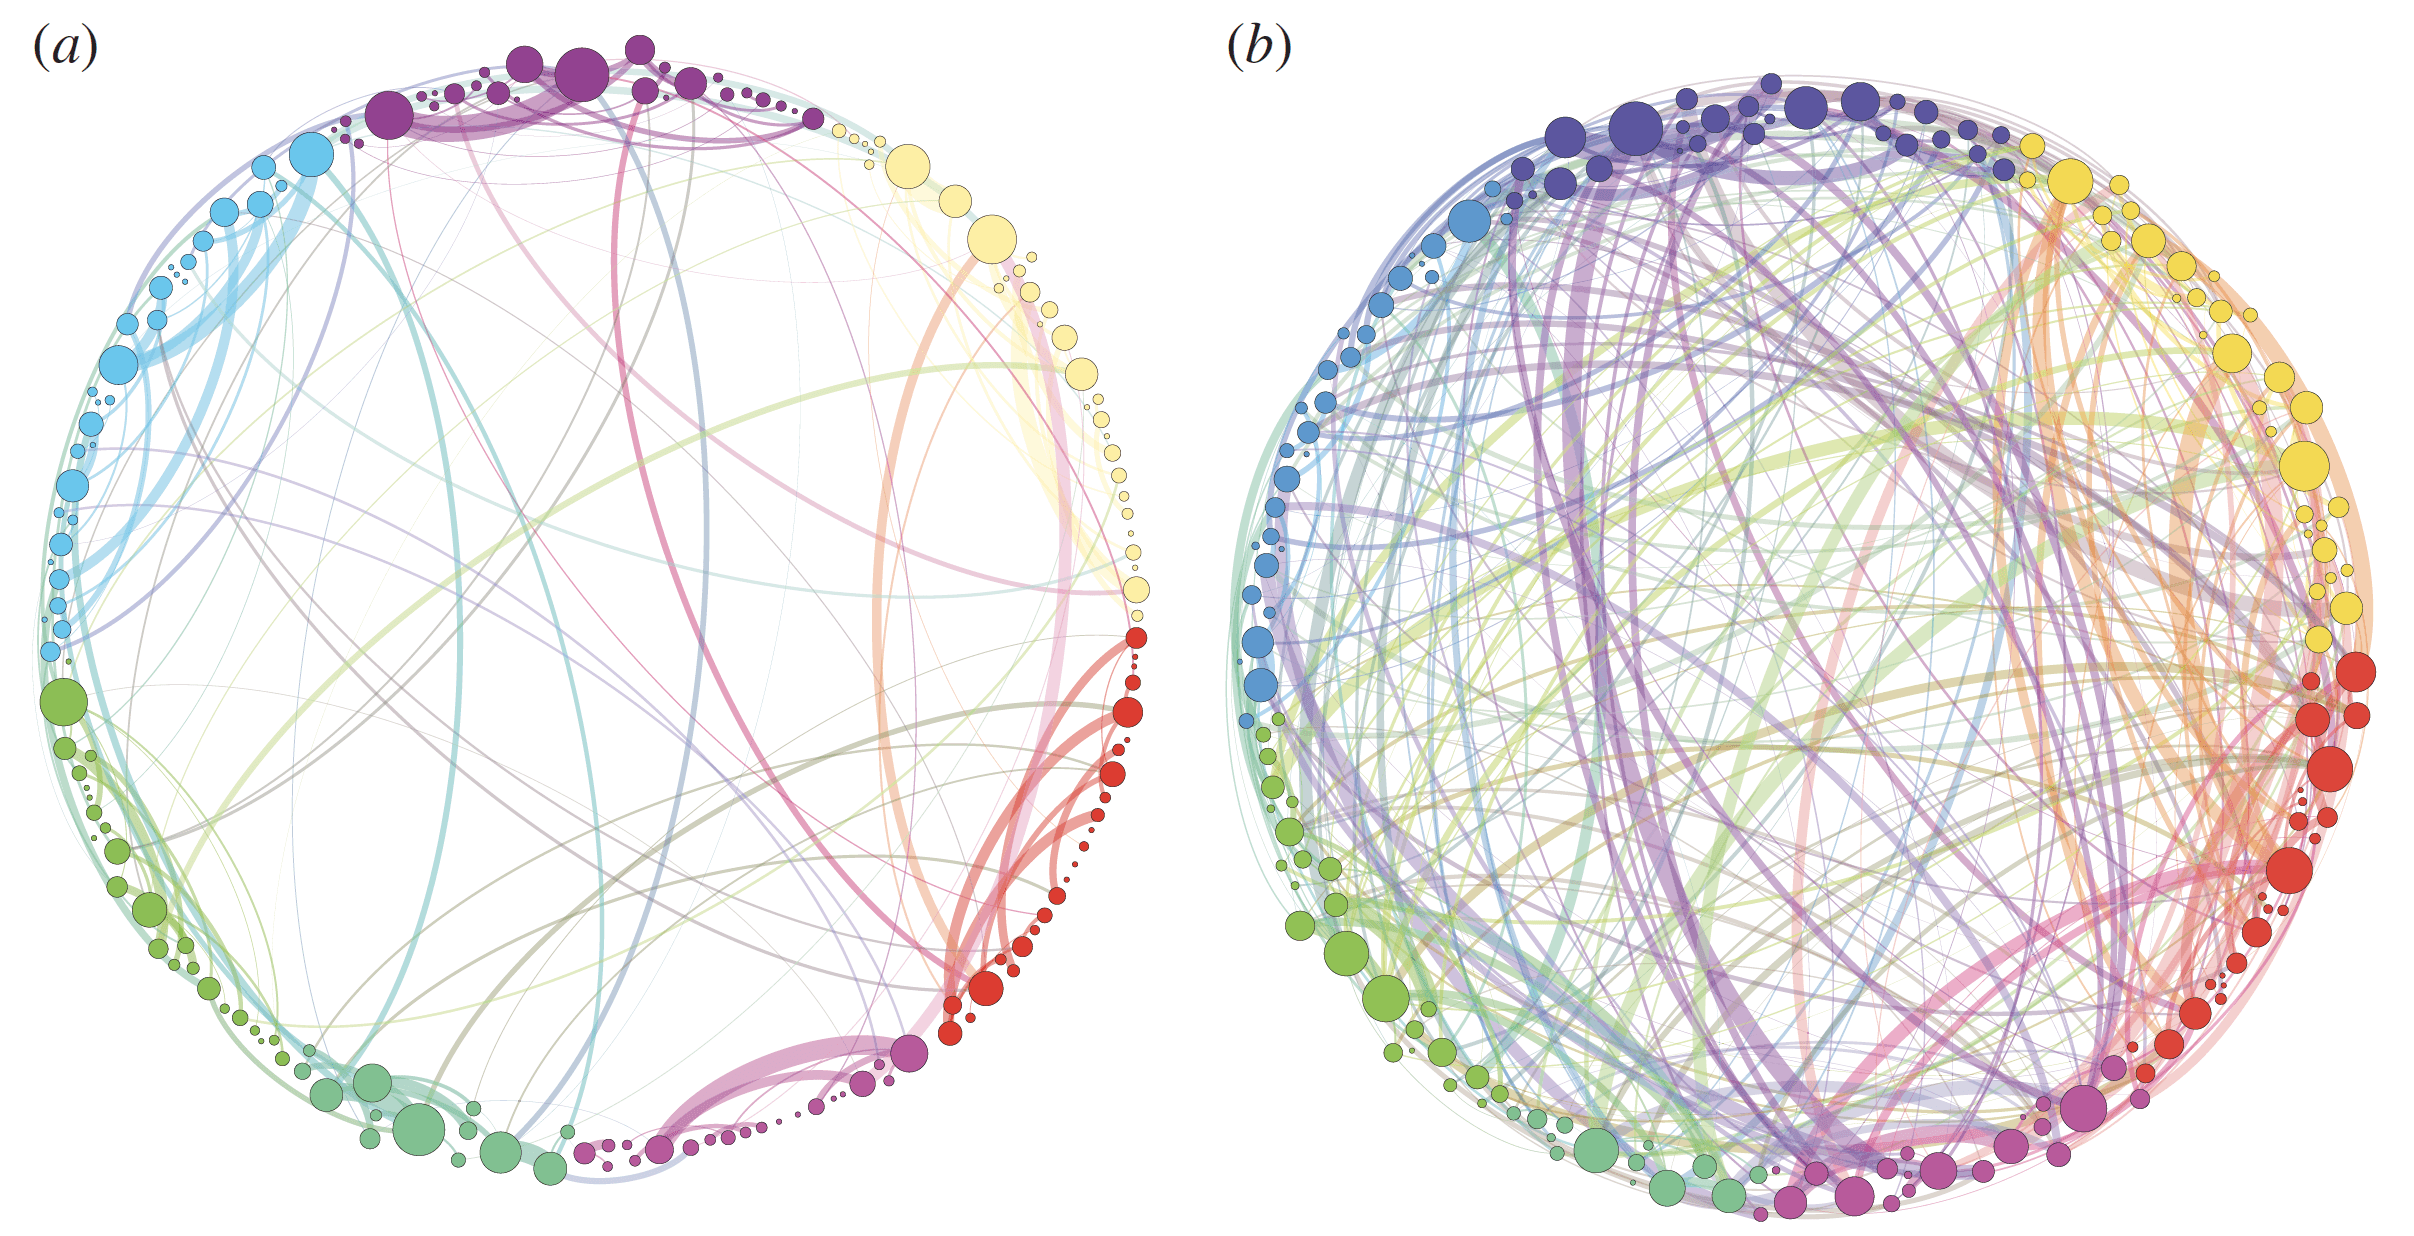 Homological scaffolds of brain functional networks